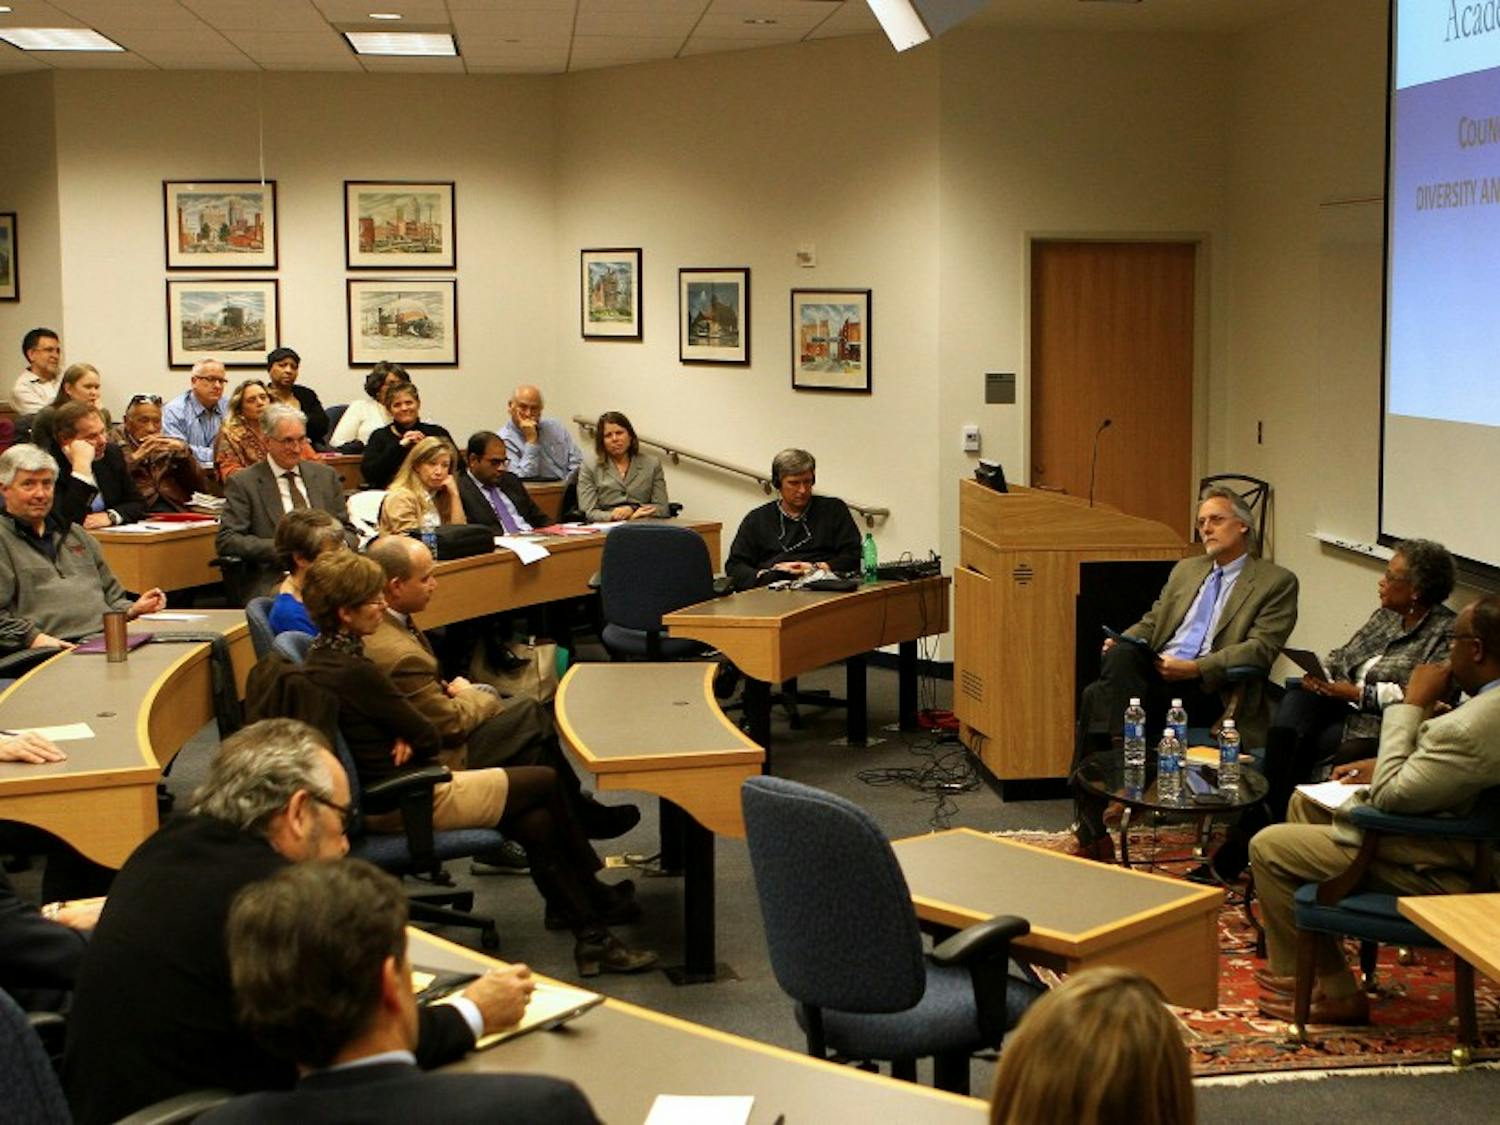 Council Chair Joshua Socolar, professor of physics, led the conversation and invited four guests to discuss the topic.